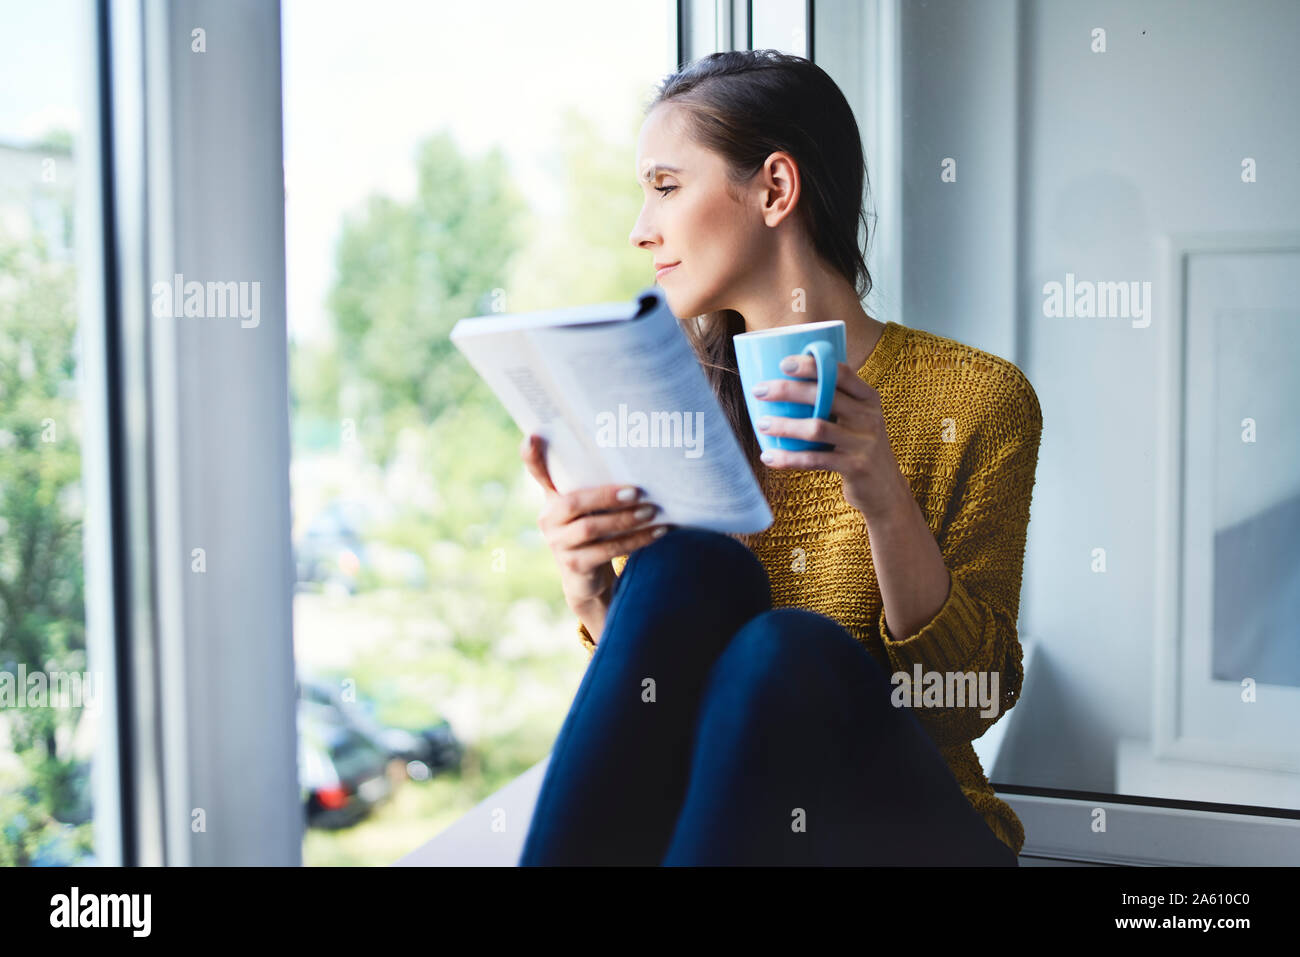 Young woman looking out the window while reading book at home Stock Photo